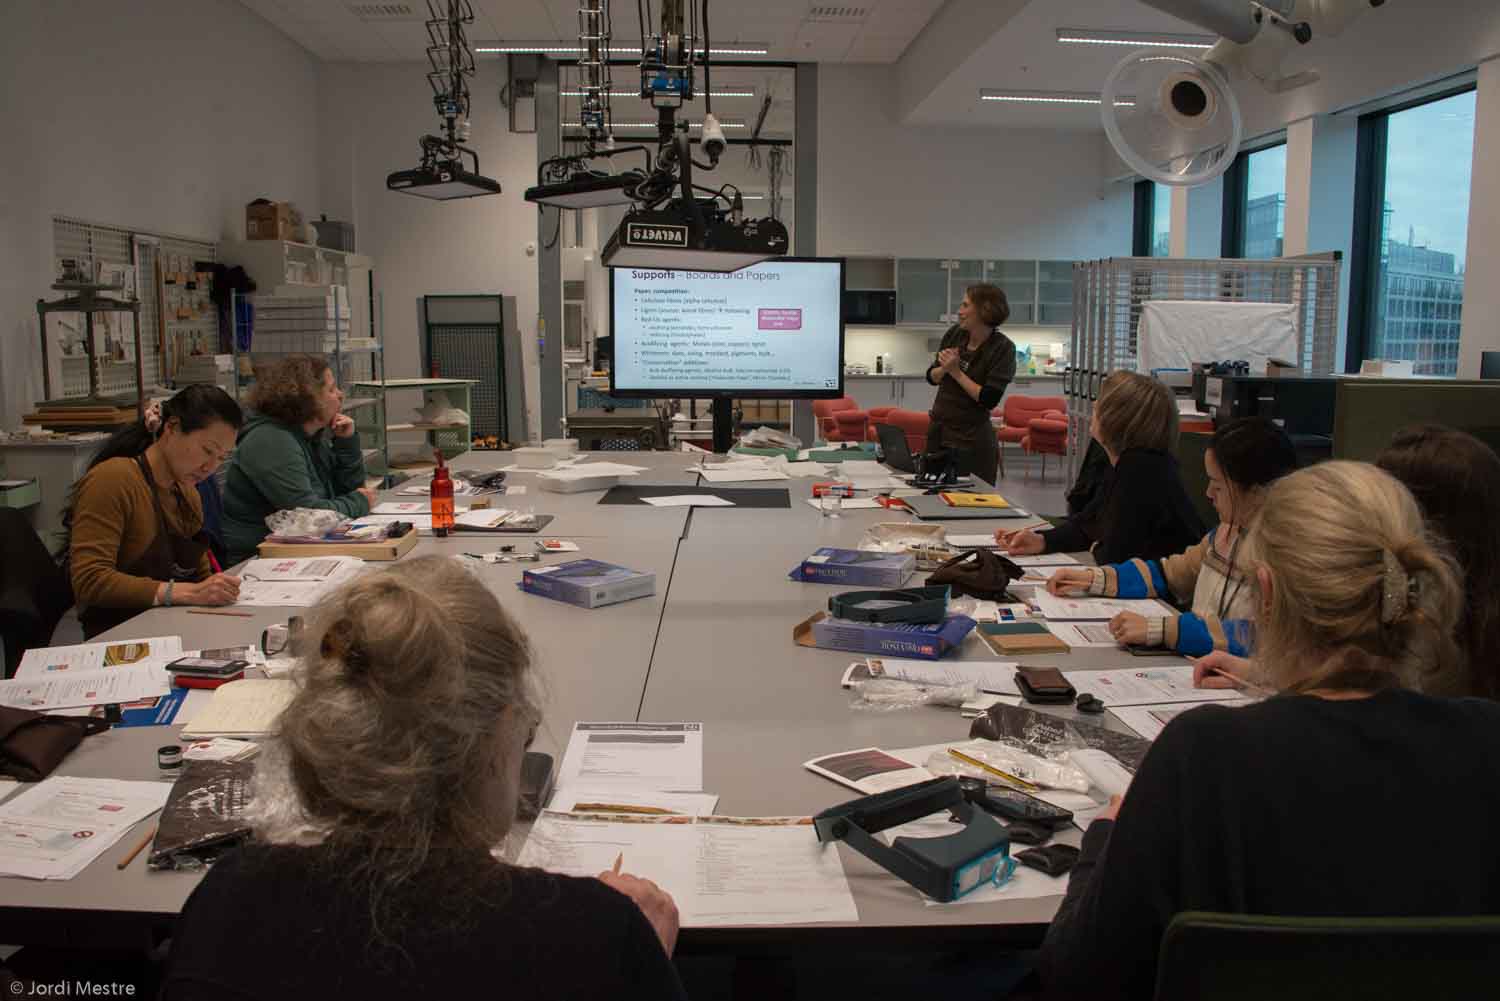 Rita Udina speaking about Materials and supports for housing, storage and exhibiting of photographs. Course "Identification, preservation and conservation of photographs"